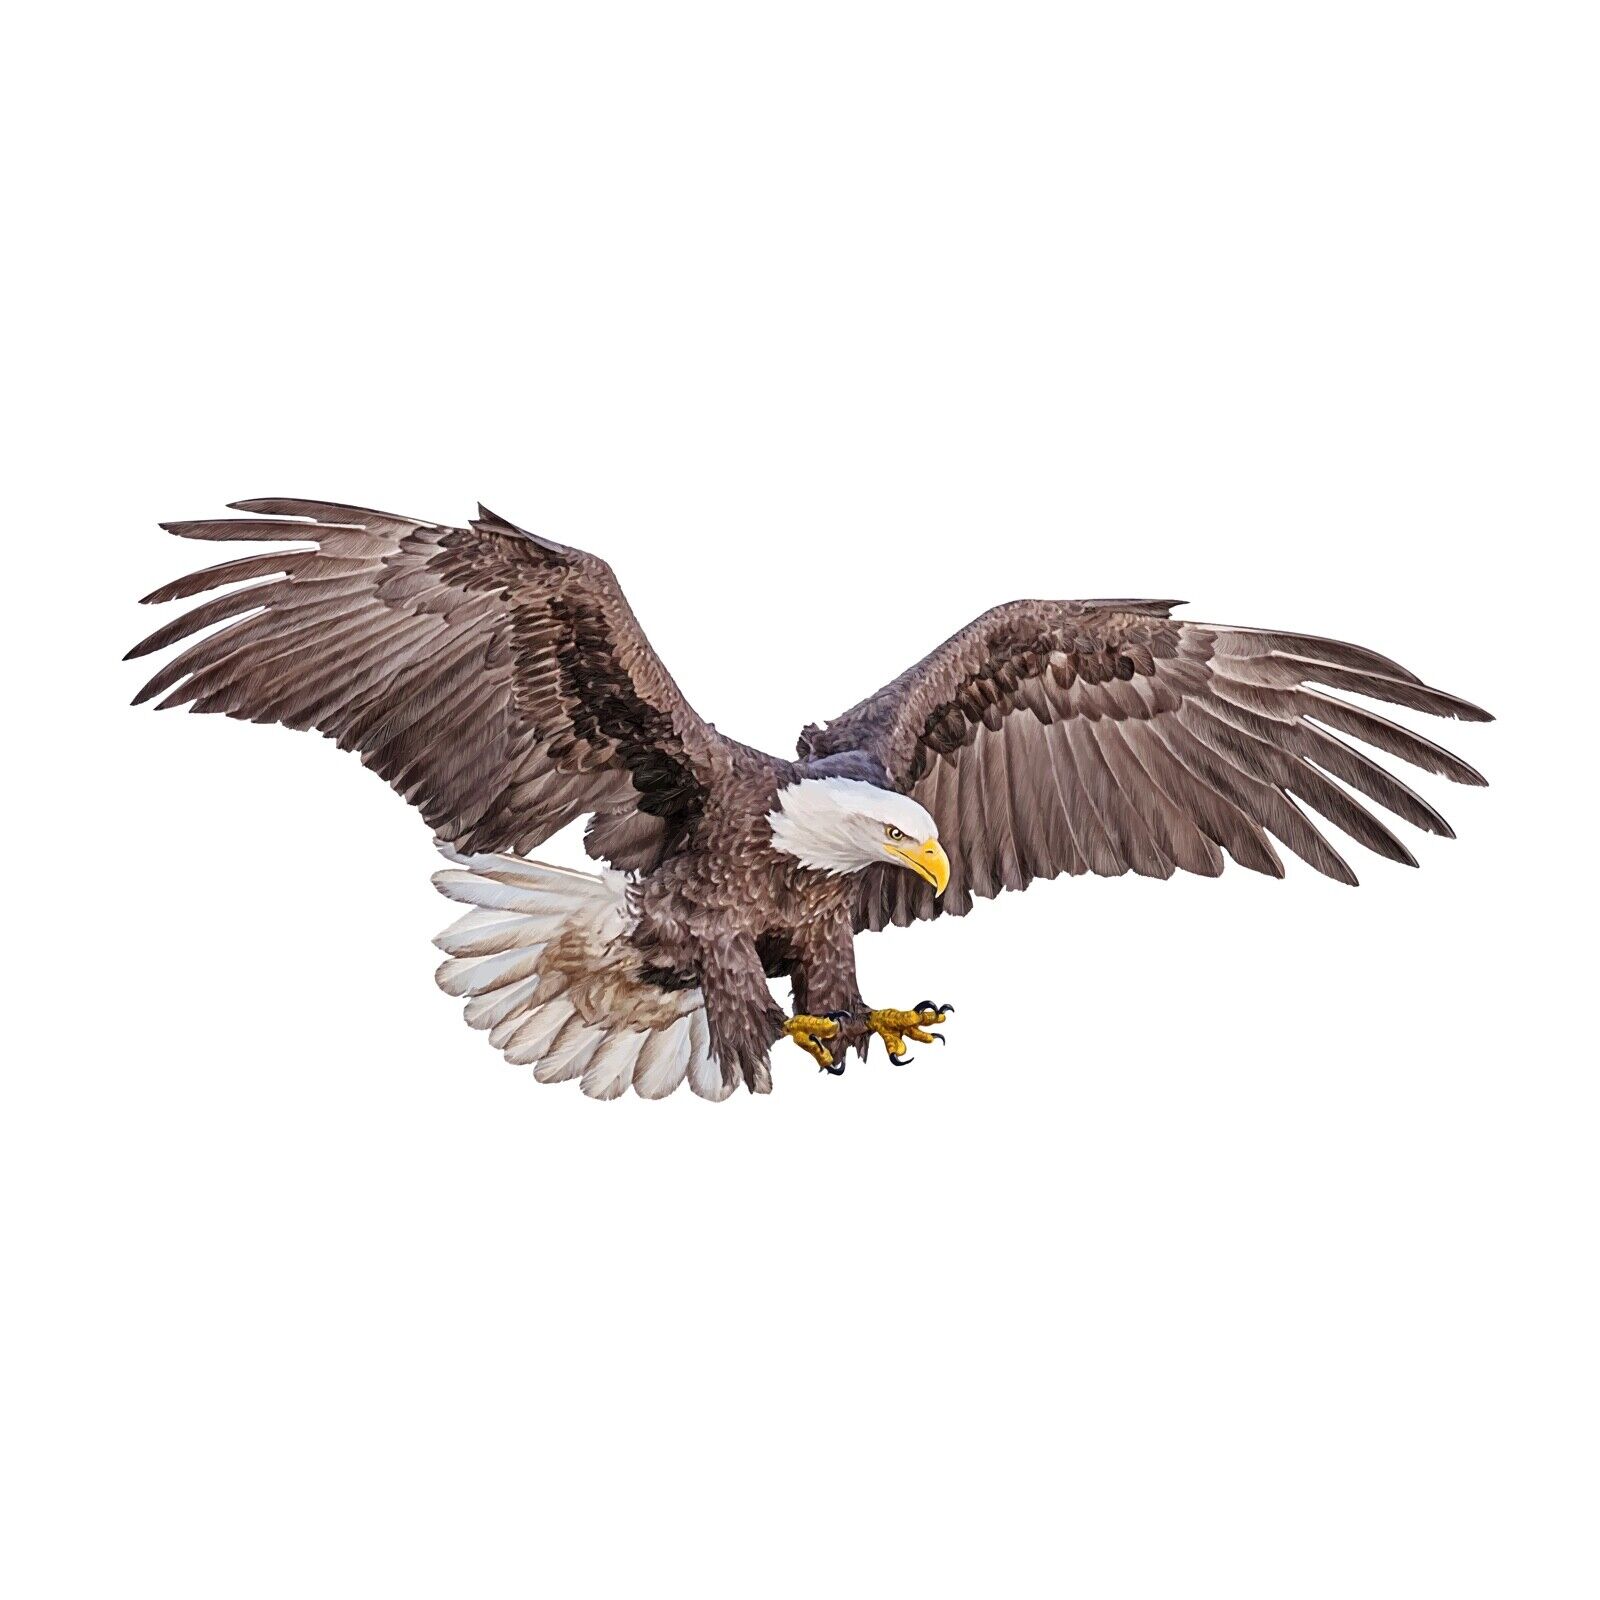 Realistic Brown East Soaring BALD EAGLE USA DECAL STICKER TRUCK VEHICLE WINDOW